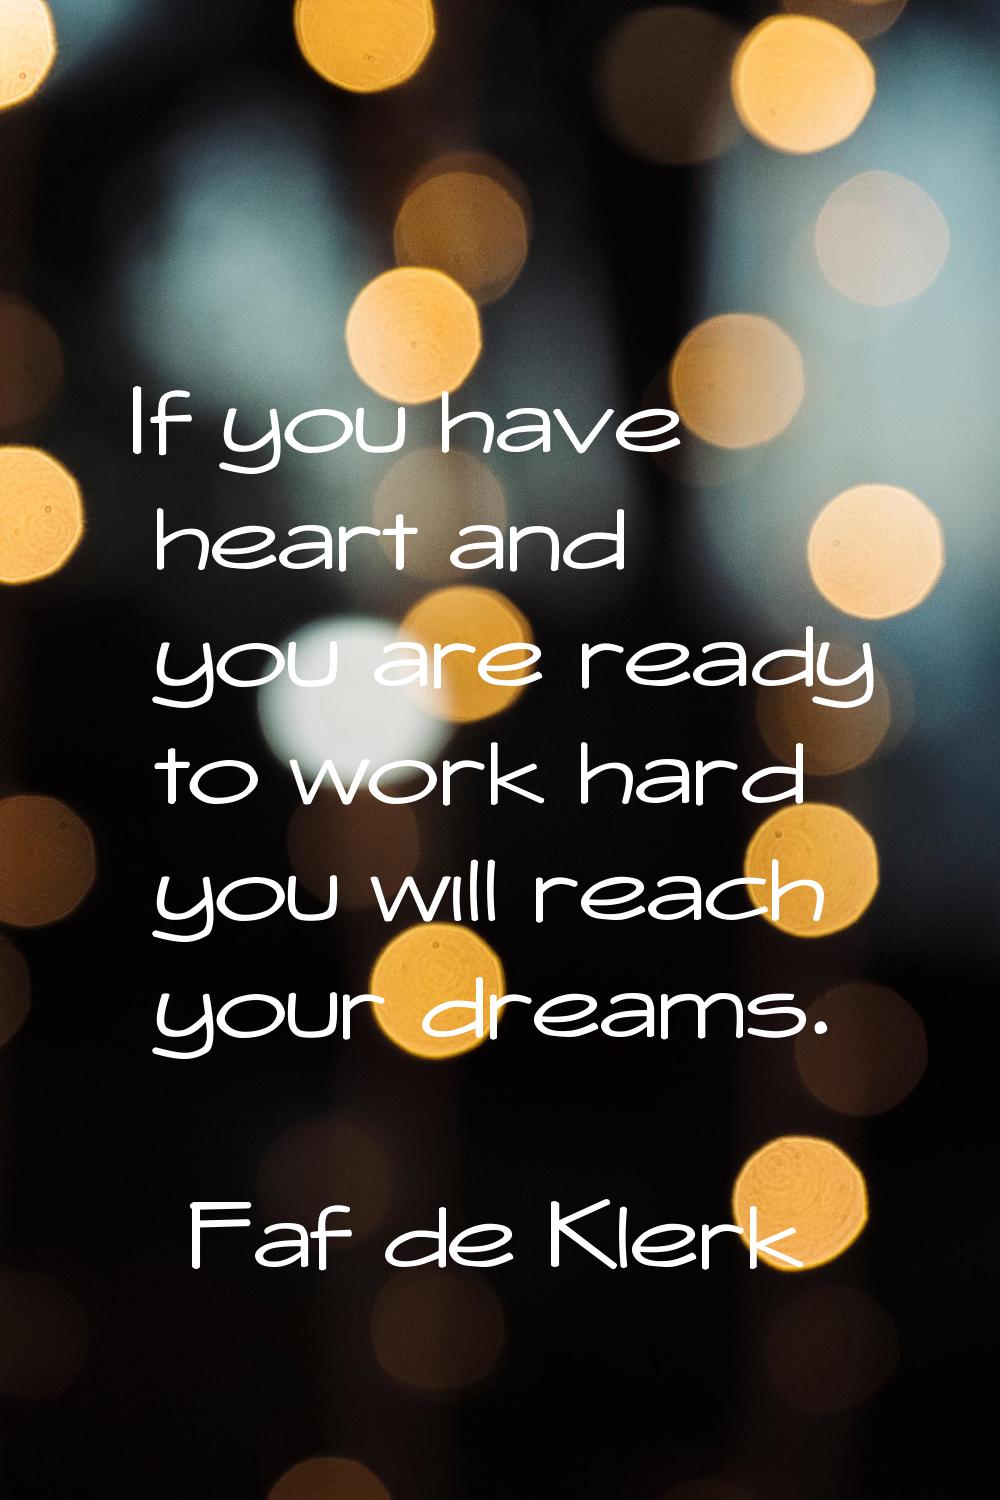 If you have heart and you are ready to work hard you will reach your dreams.